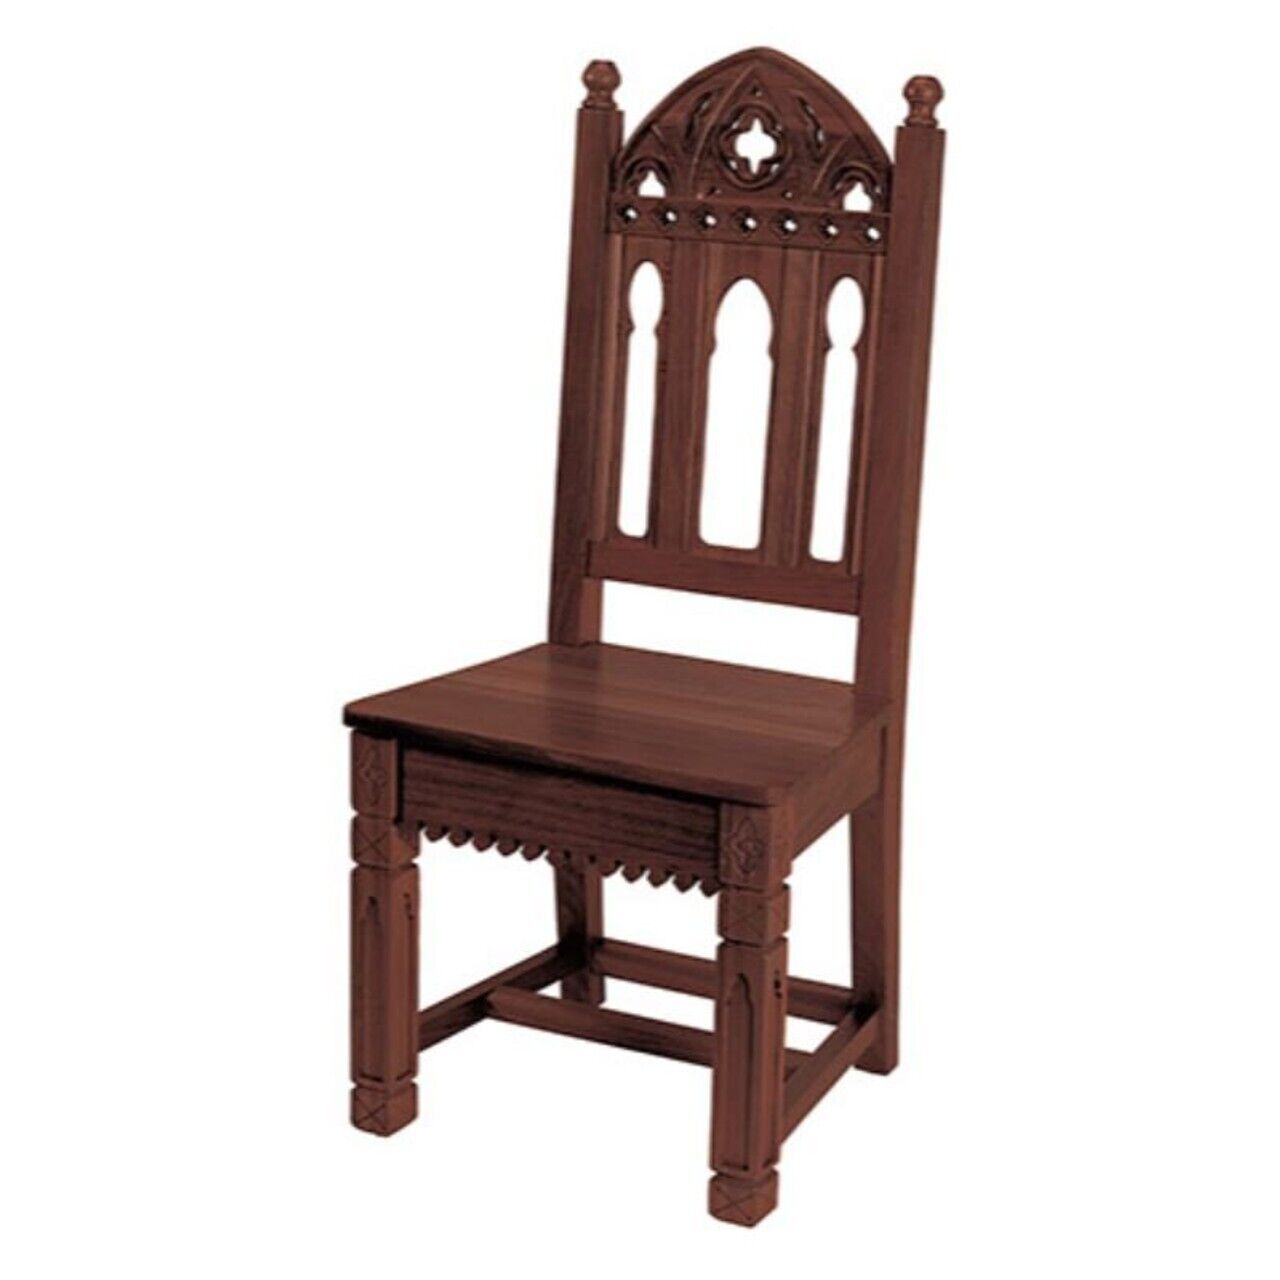 Gothic Cross Cutout Walnut Stain Maple Hardwood Side Chair for Church Use 42 In